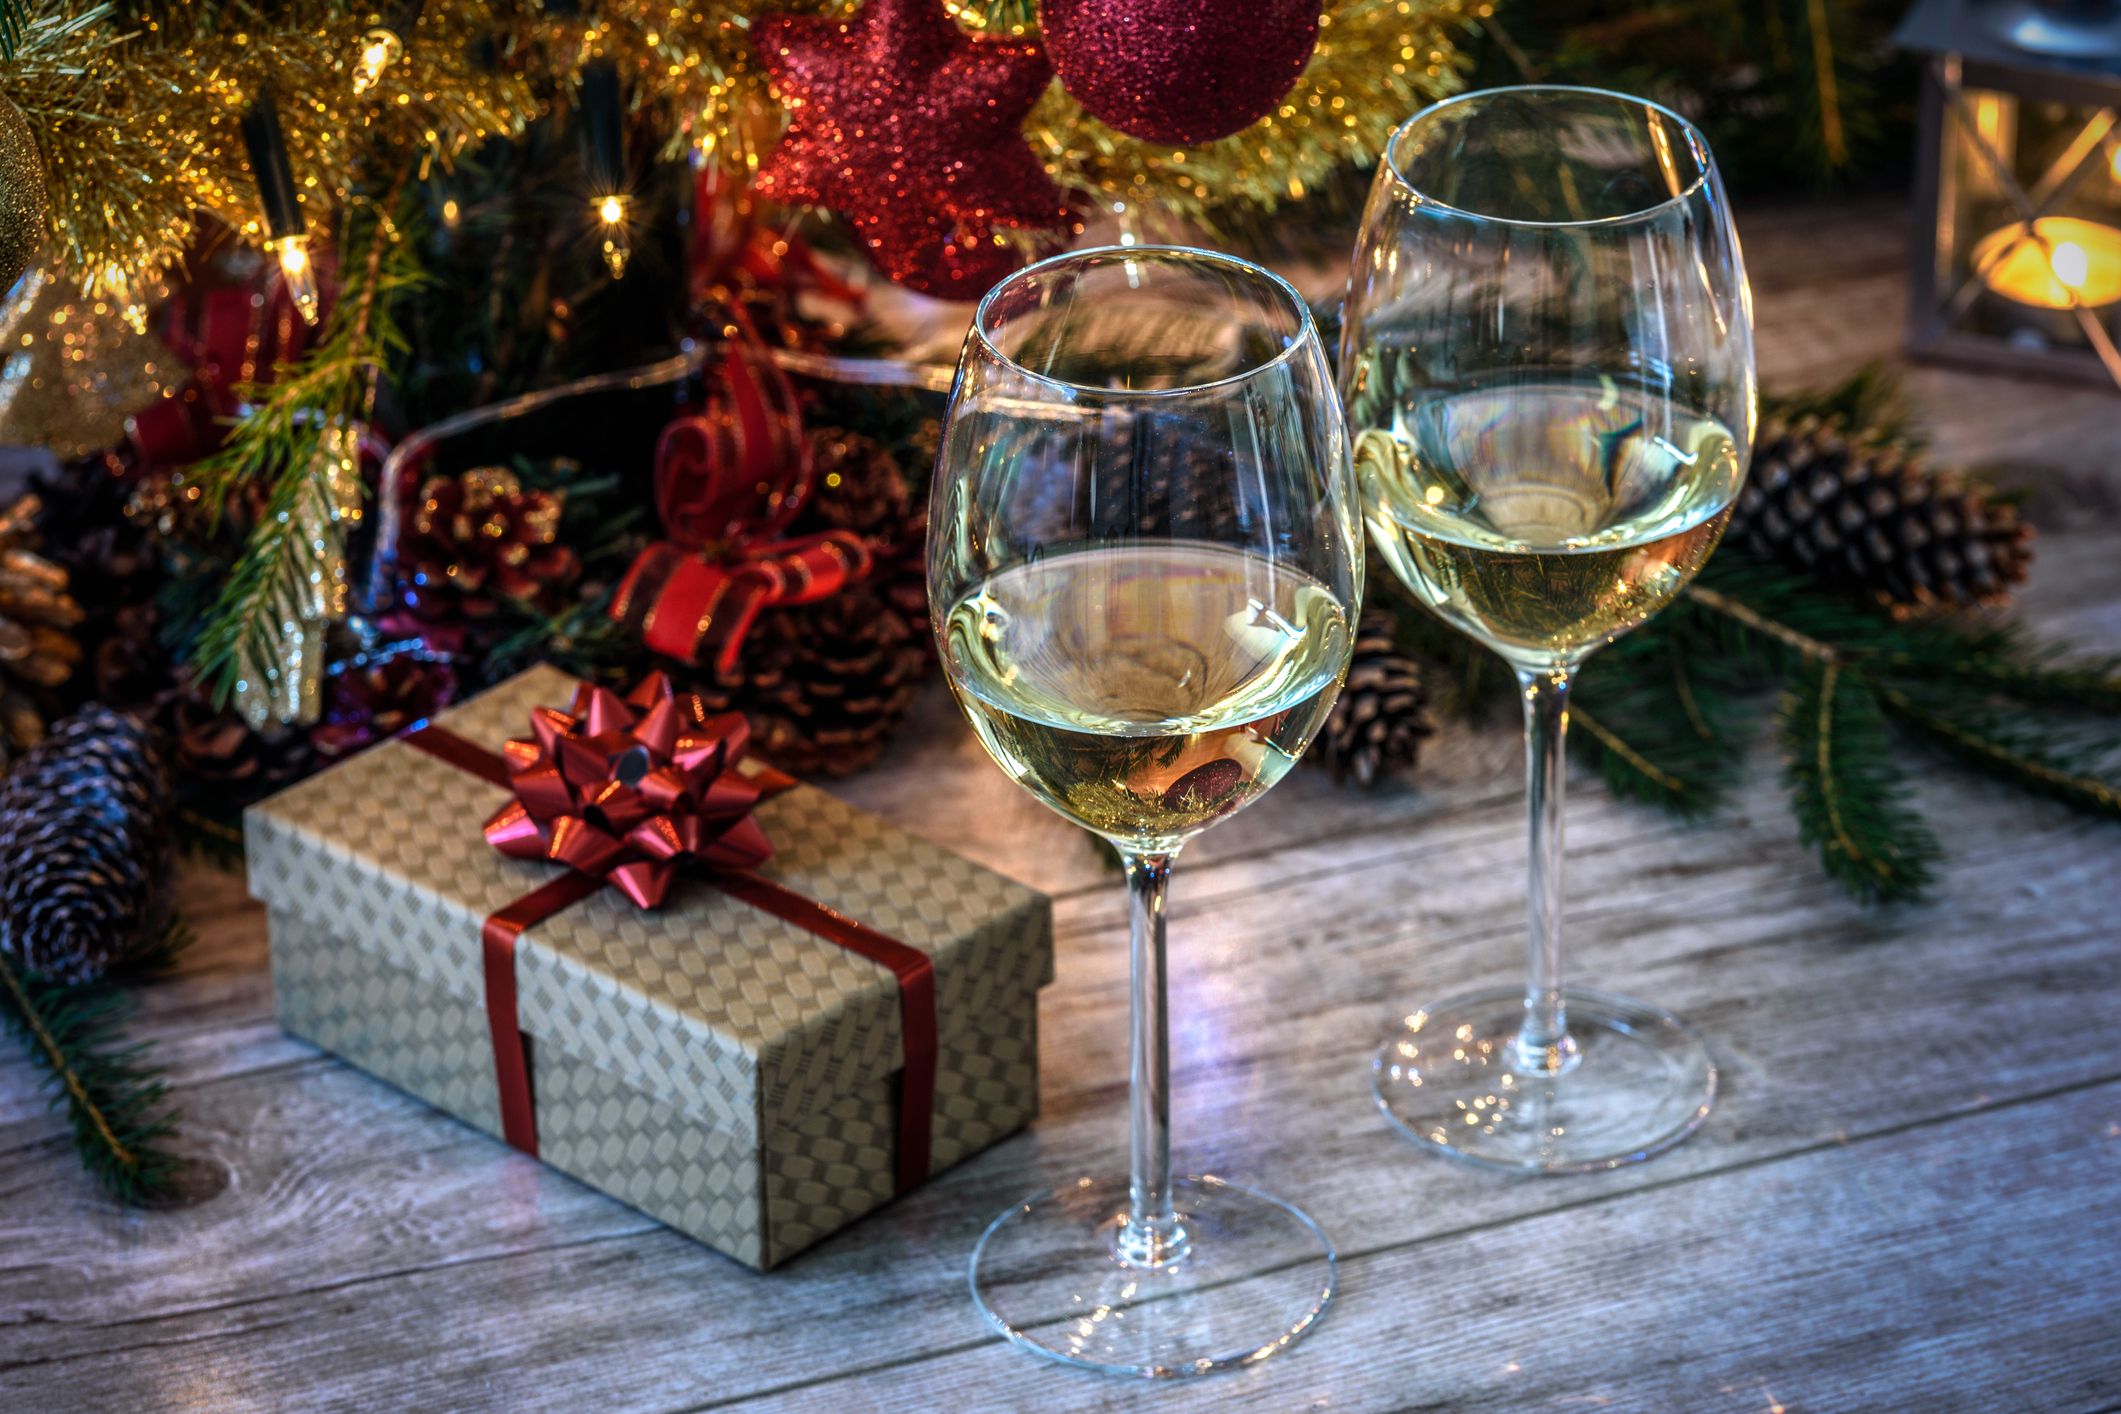 12 Best Christmas Wines in 2020 - Wines for Christmas Dinner